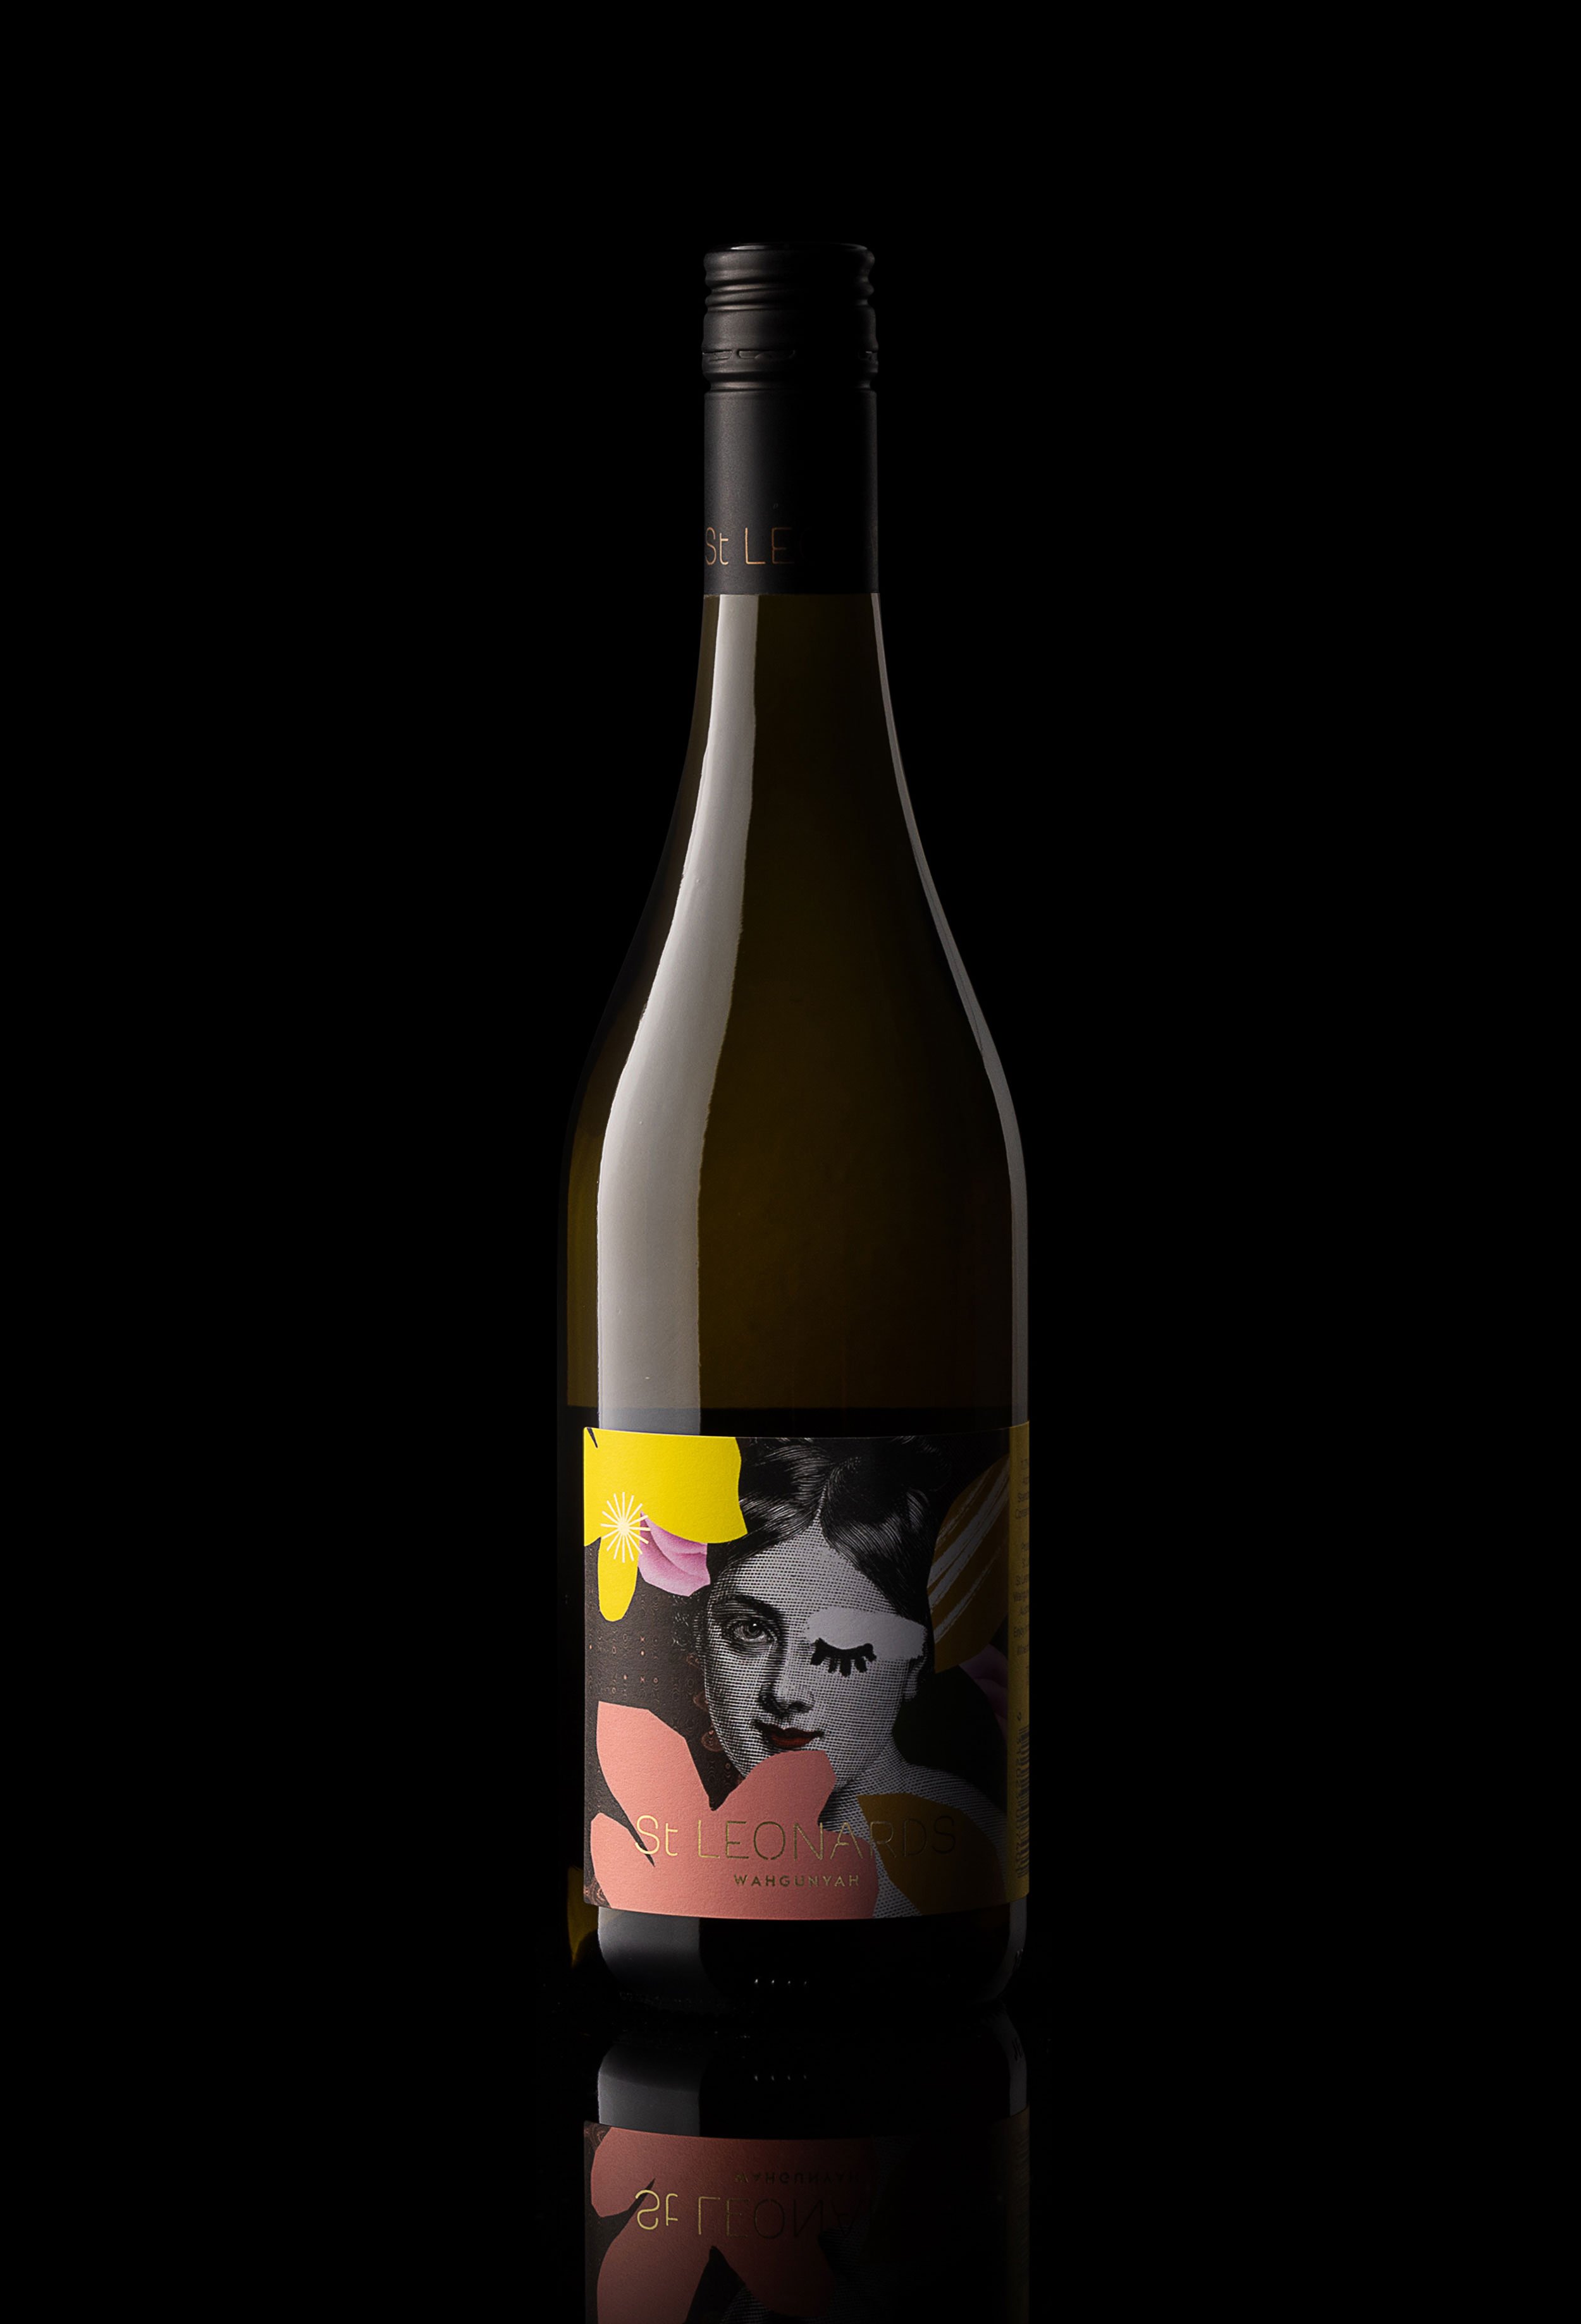 photograph taken by sarah anderson for Cloudy Co of St Leonards Vineyard wine bottle with pink and yellow label.jpg